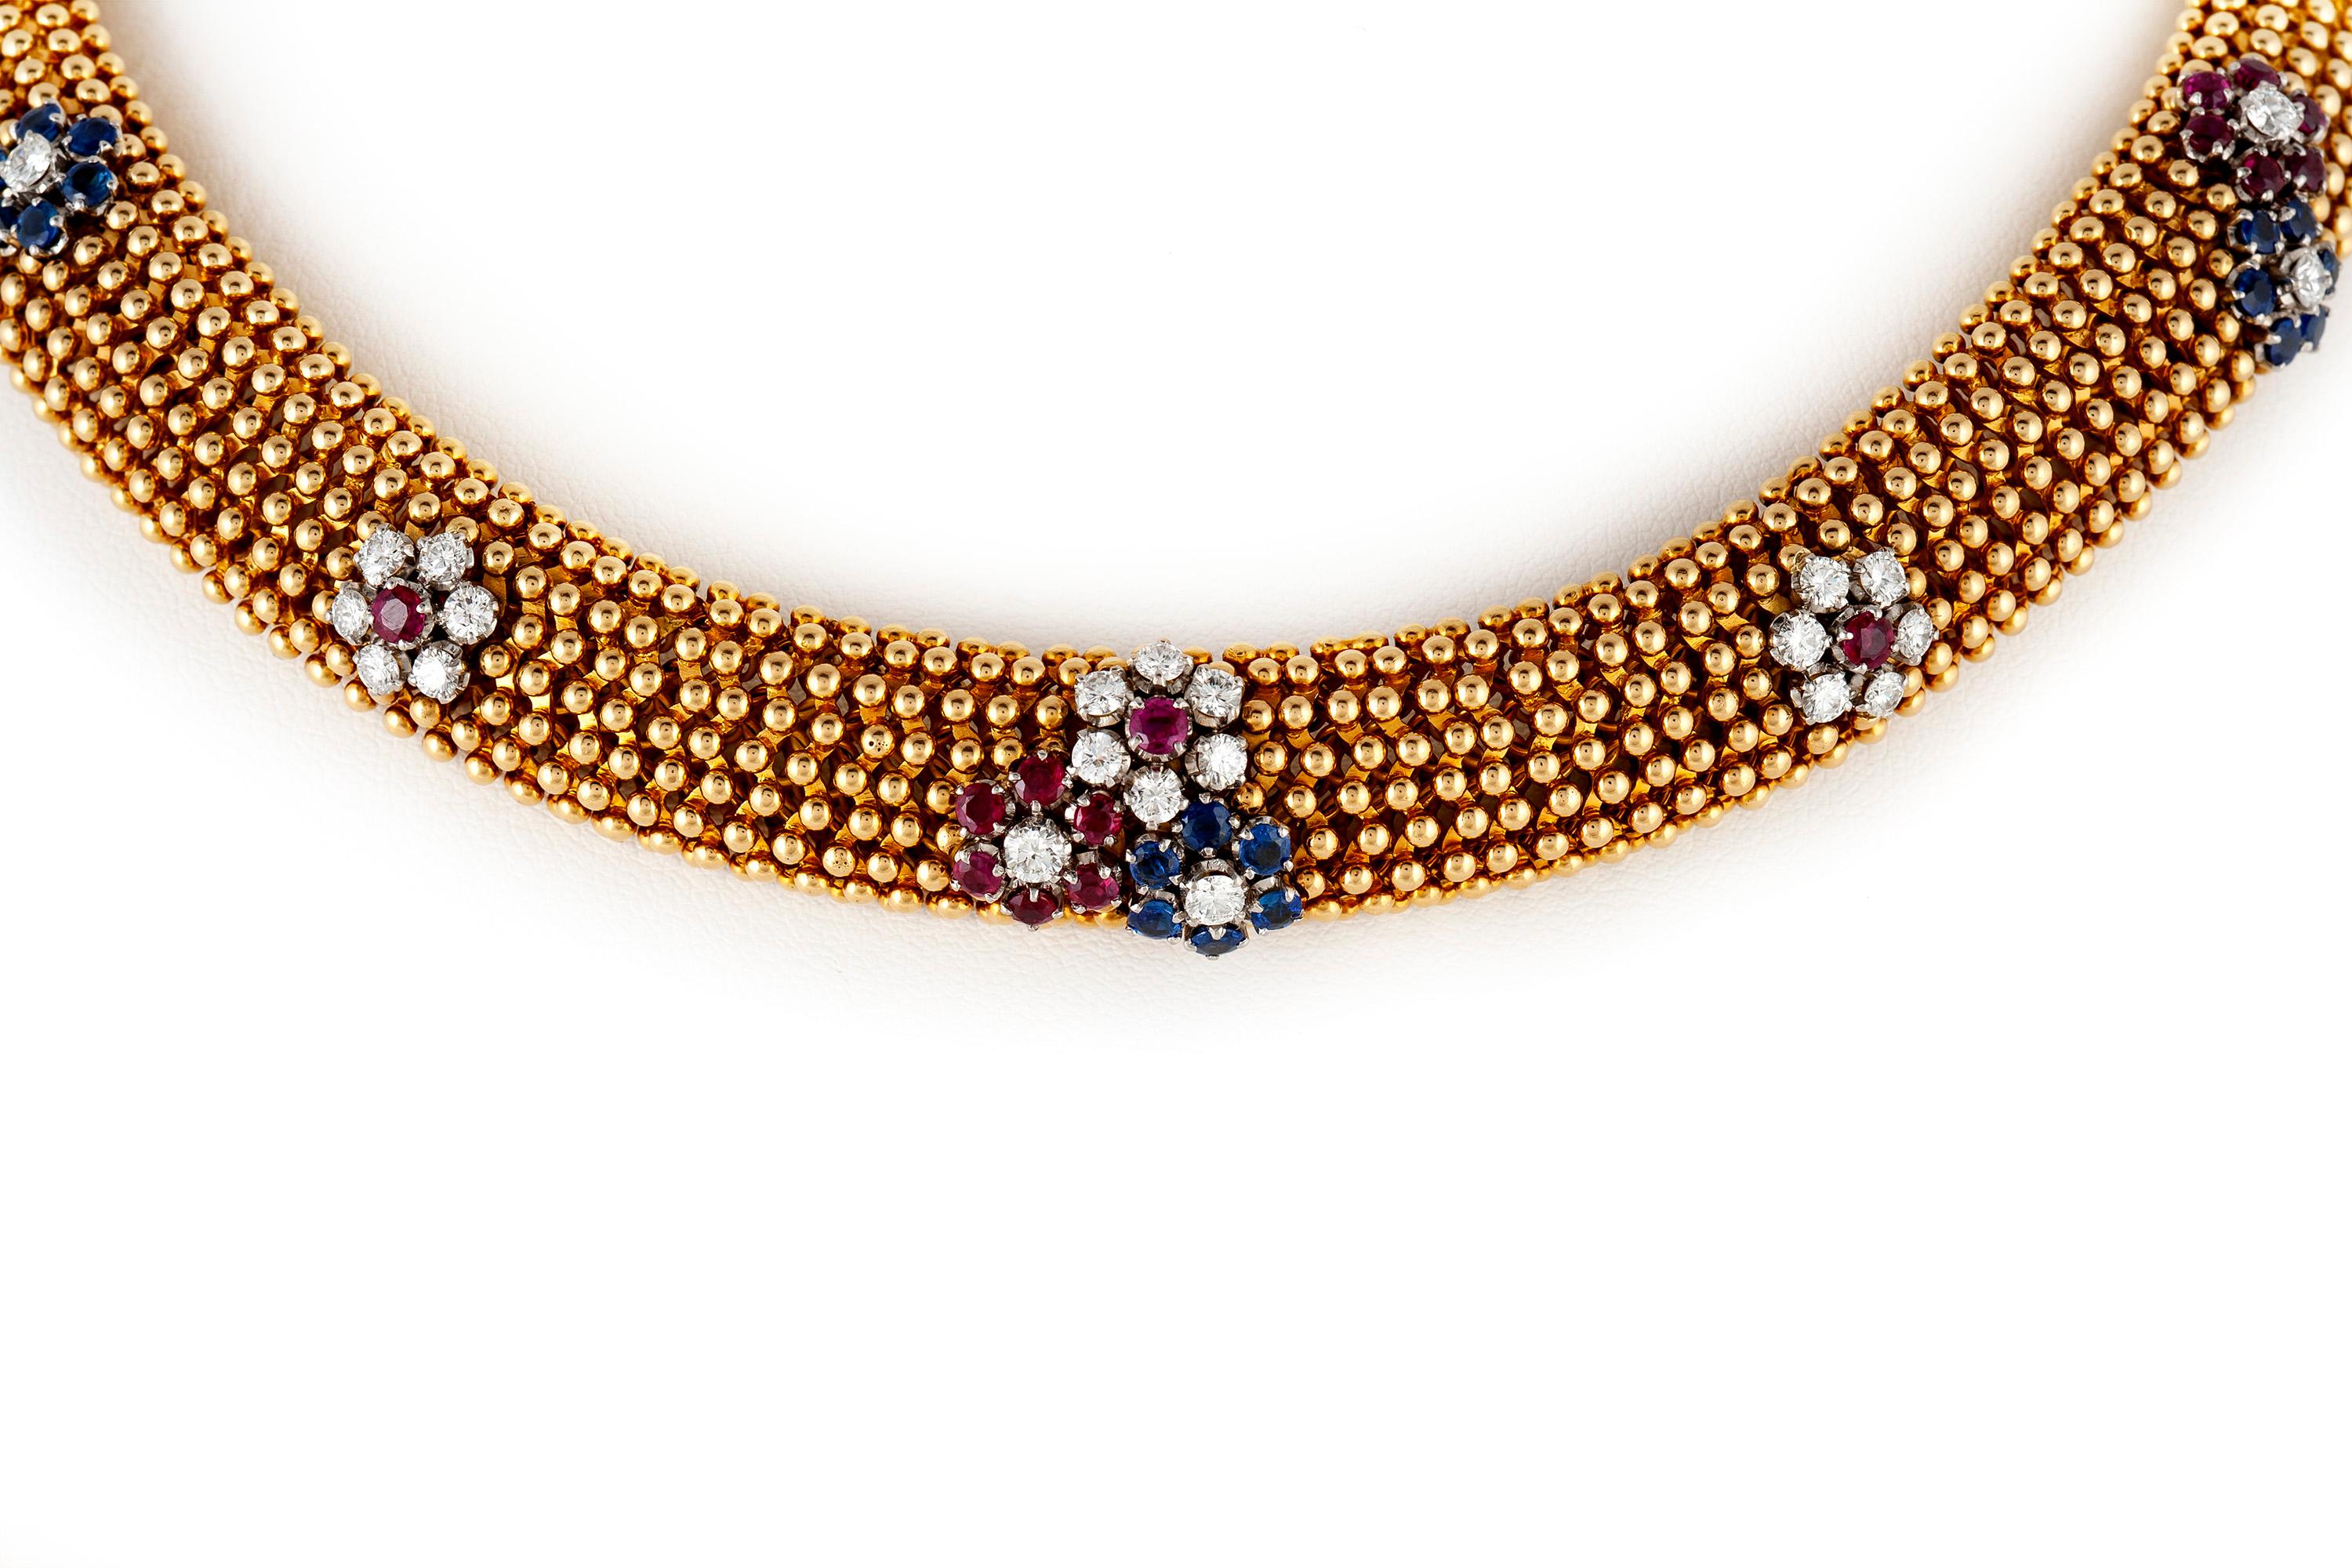 Vintage choker necklace, finely crafted in 18 k yellow gold, accented with flower motifs created with brilliant cut diamonds, sapphires and rubies. The necklace converts to two bracelets, measuring 7.5 inches and 8 inches. 